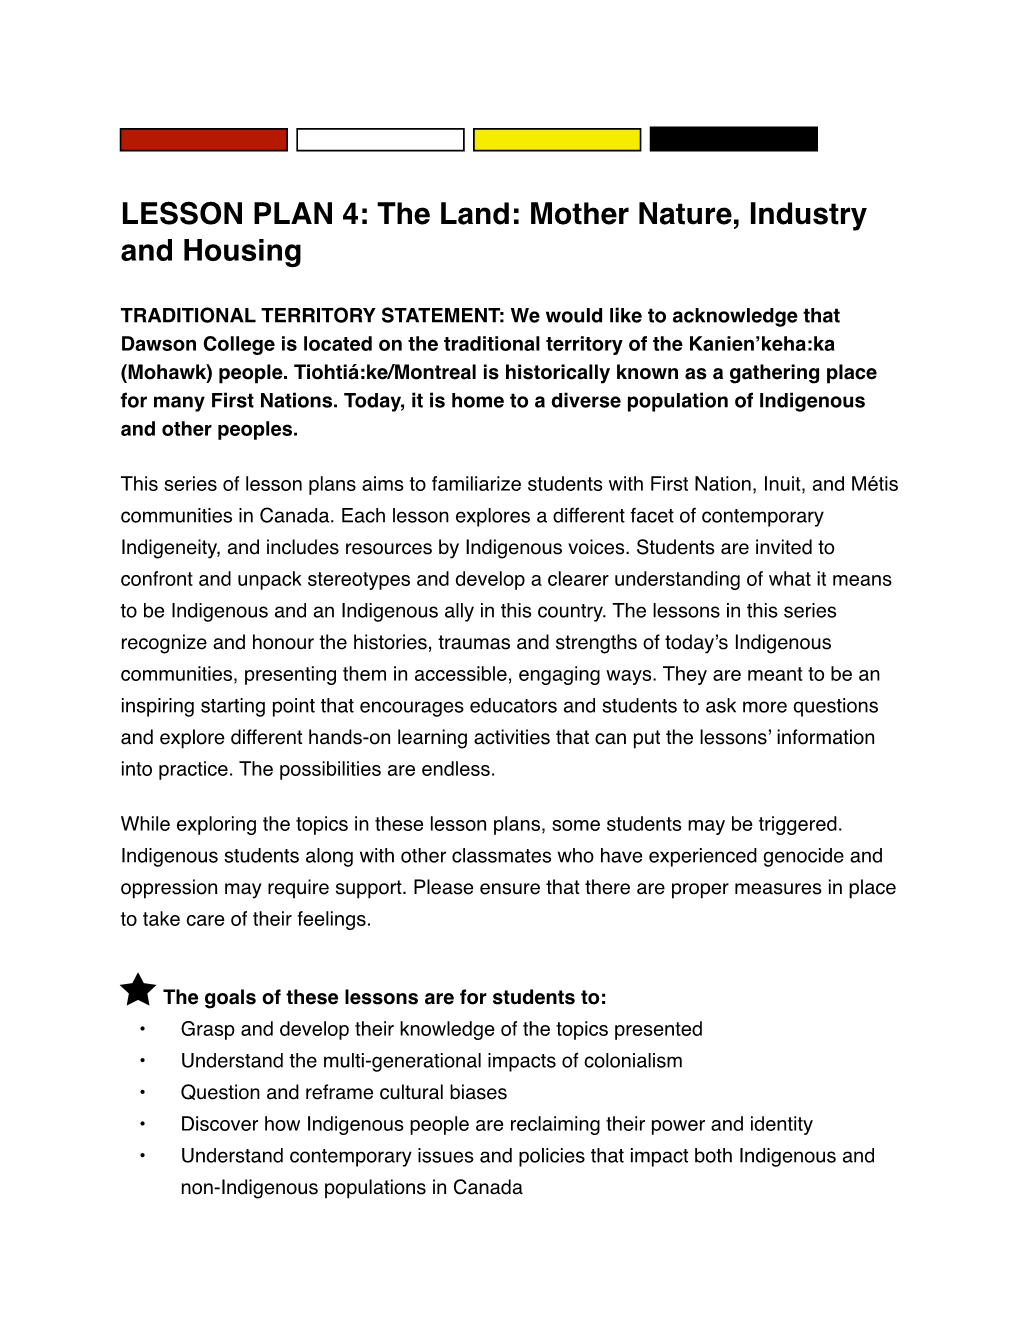 LESSON PLAN 4: the Land: Mother Nature, Industry and Housing